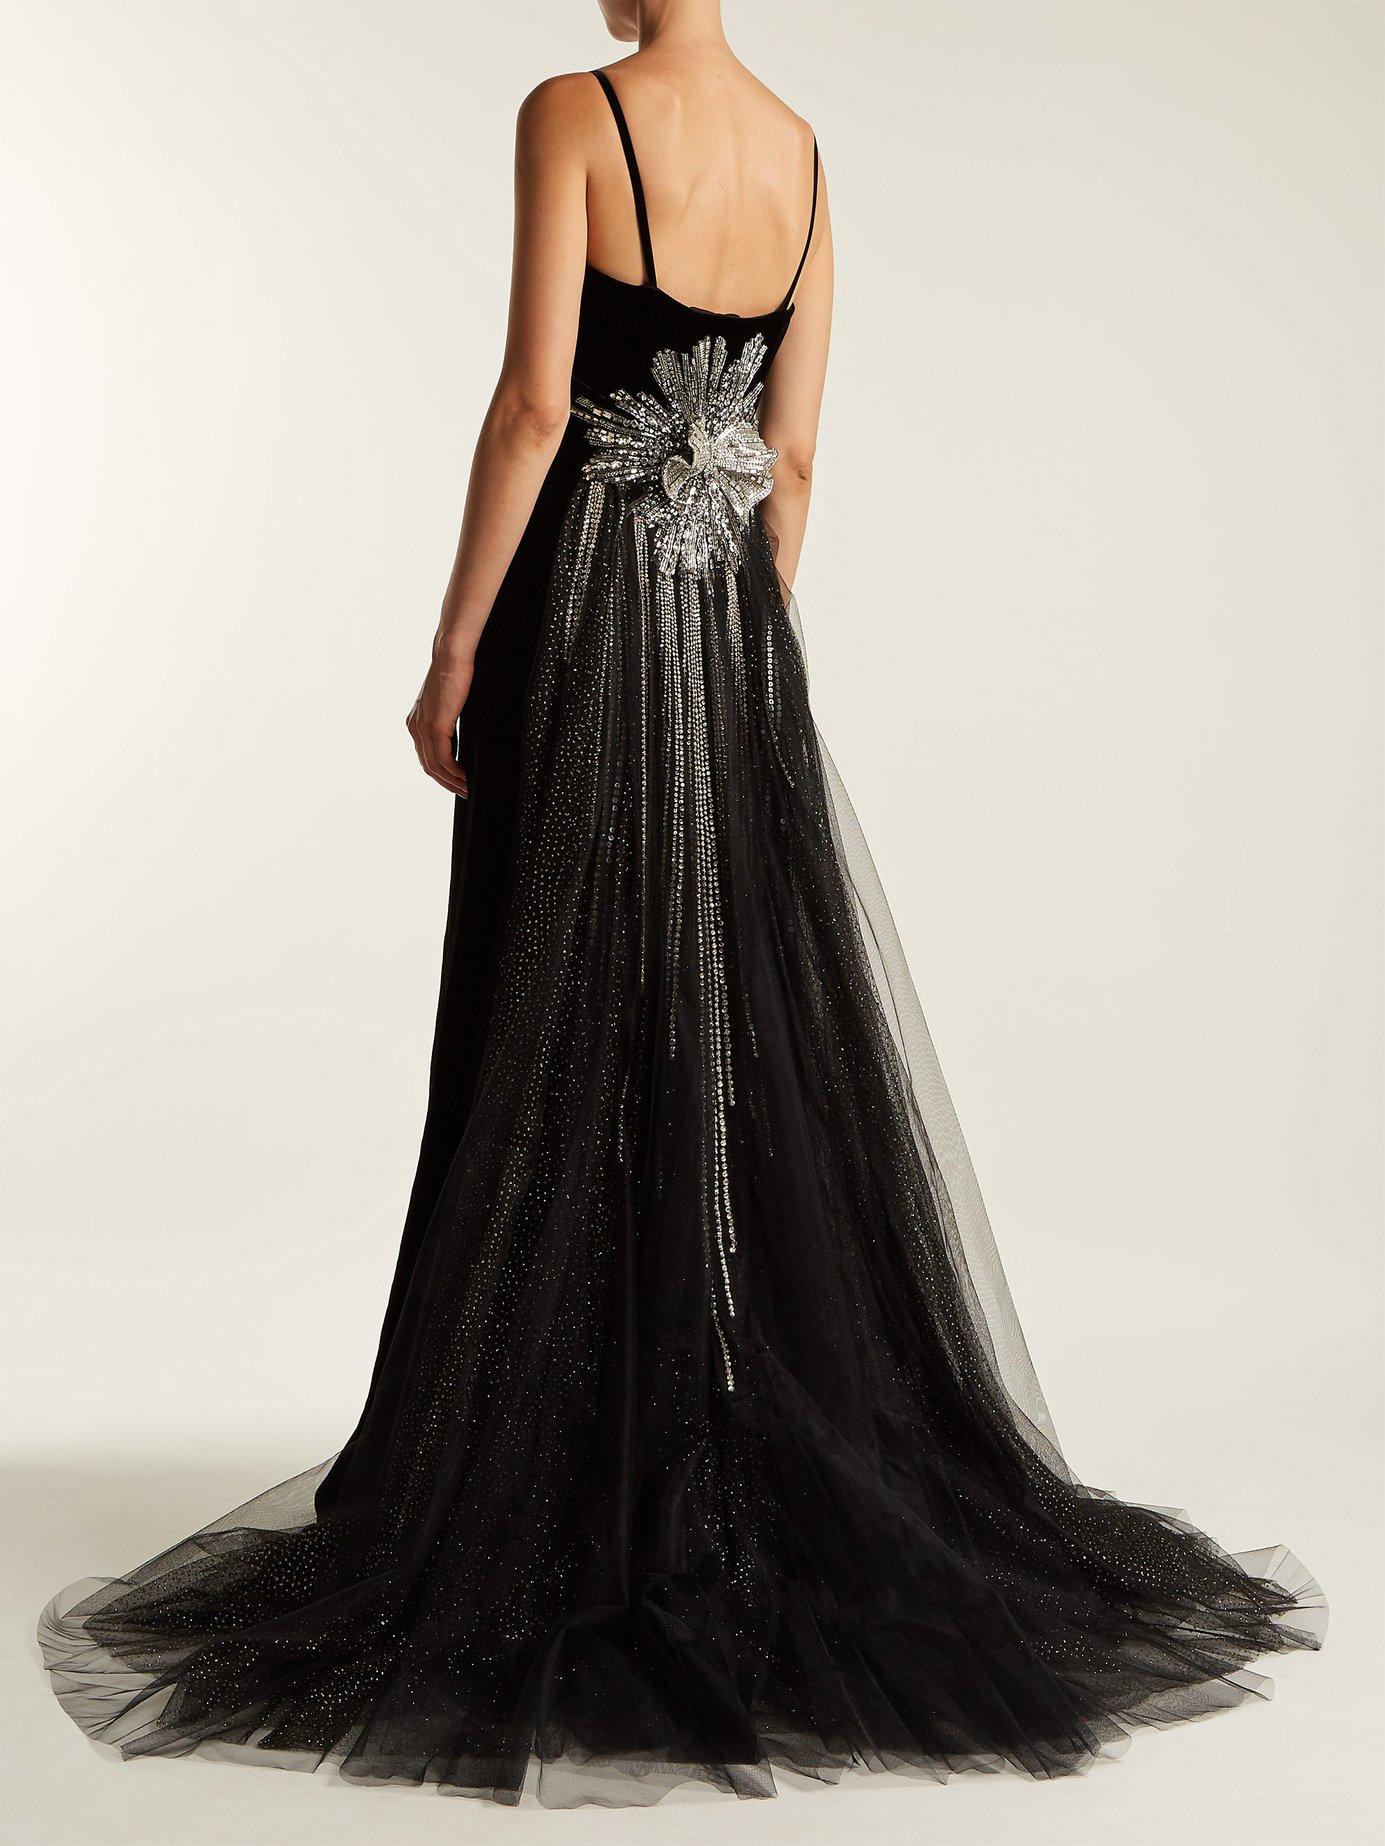 gucci black gown